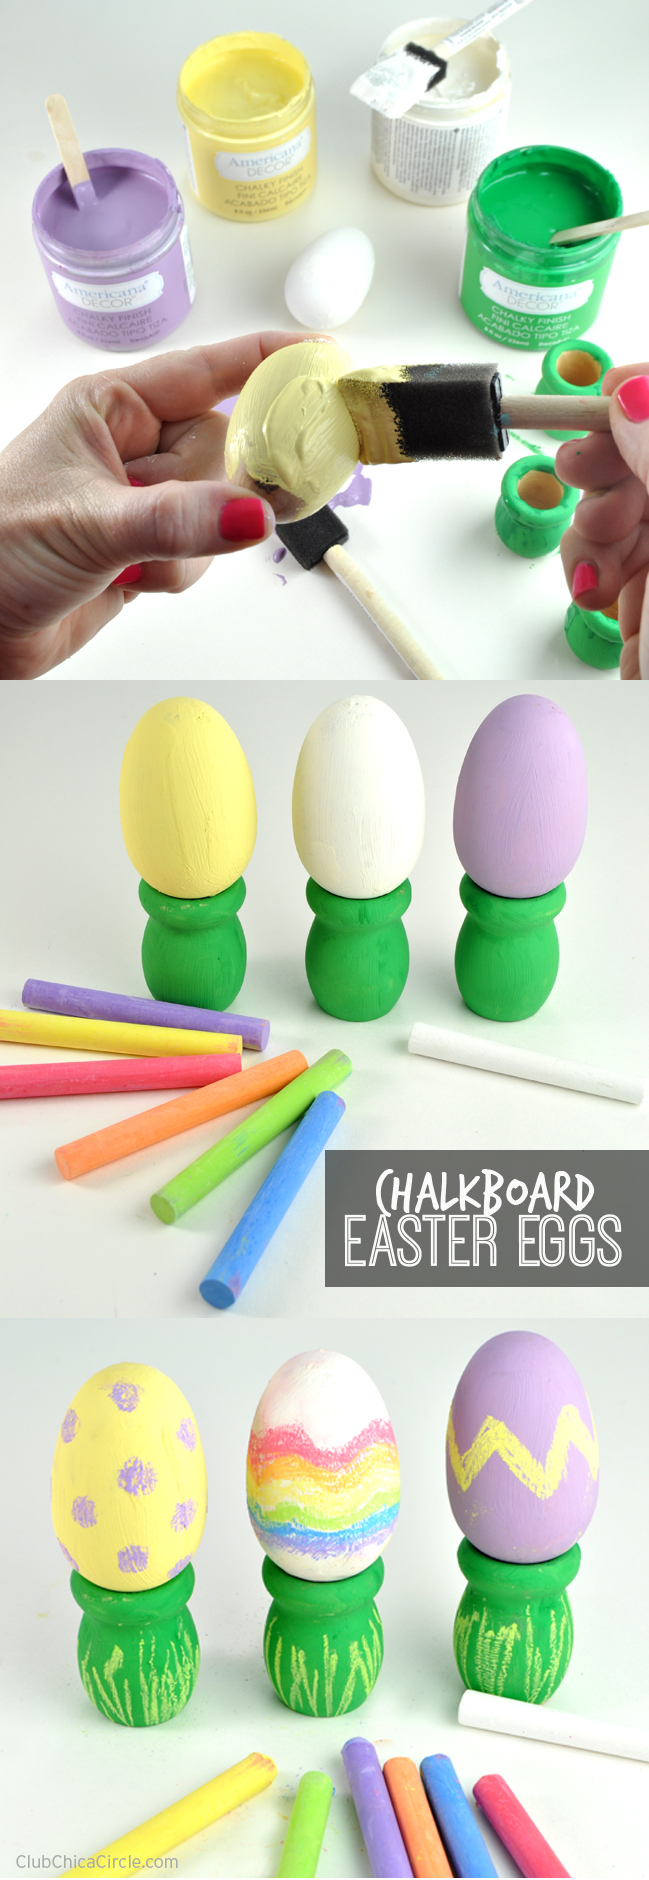 Easy Chalkboard Easter Eggs Craft Idea @clubchicacircle